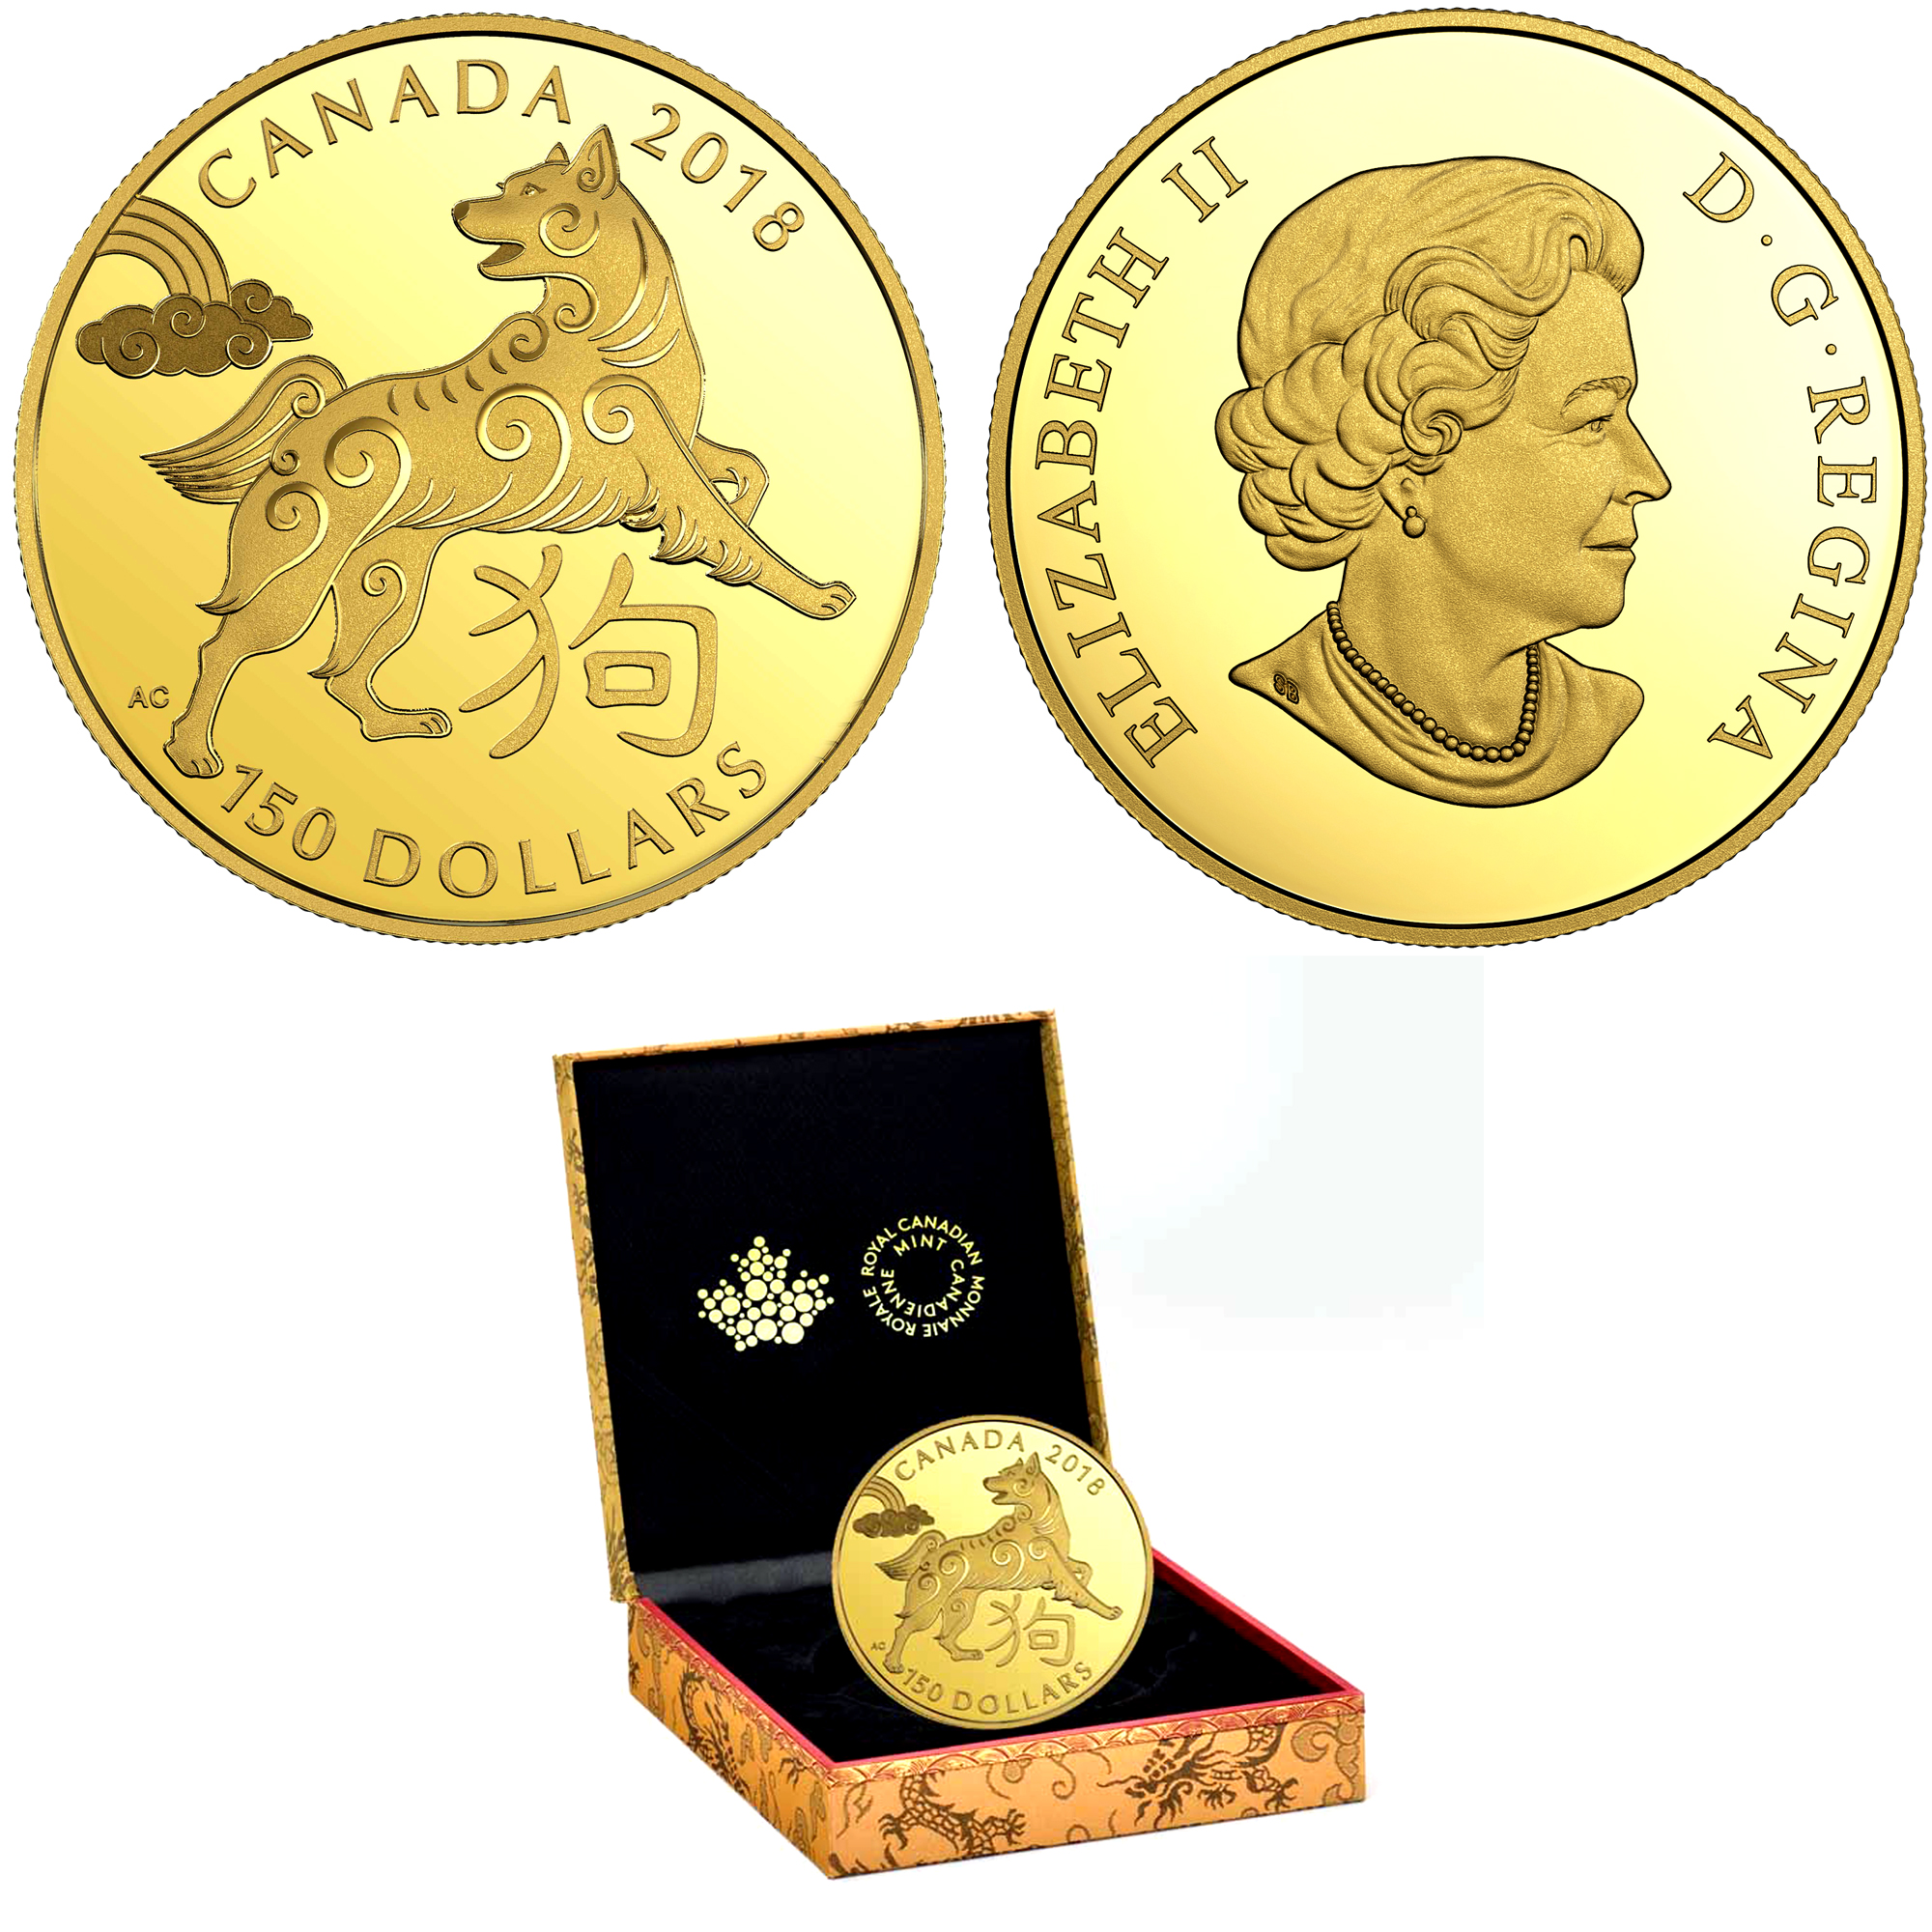 CHINESE LUNAR CALENDAR YEAR OF THE DOG 2018 CANADIAN COINS 09